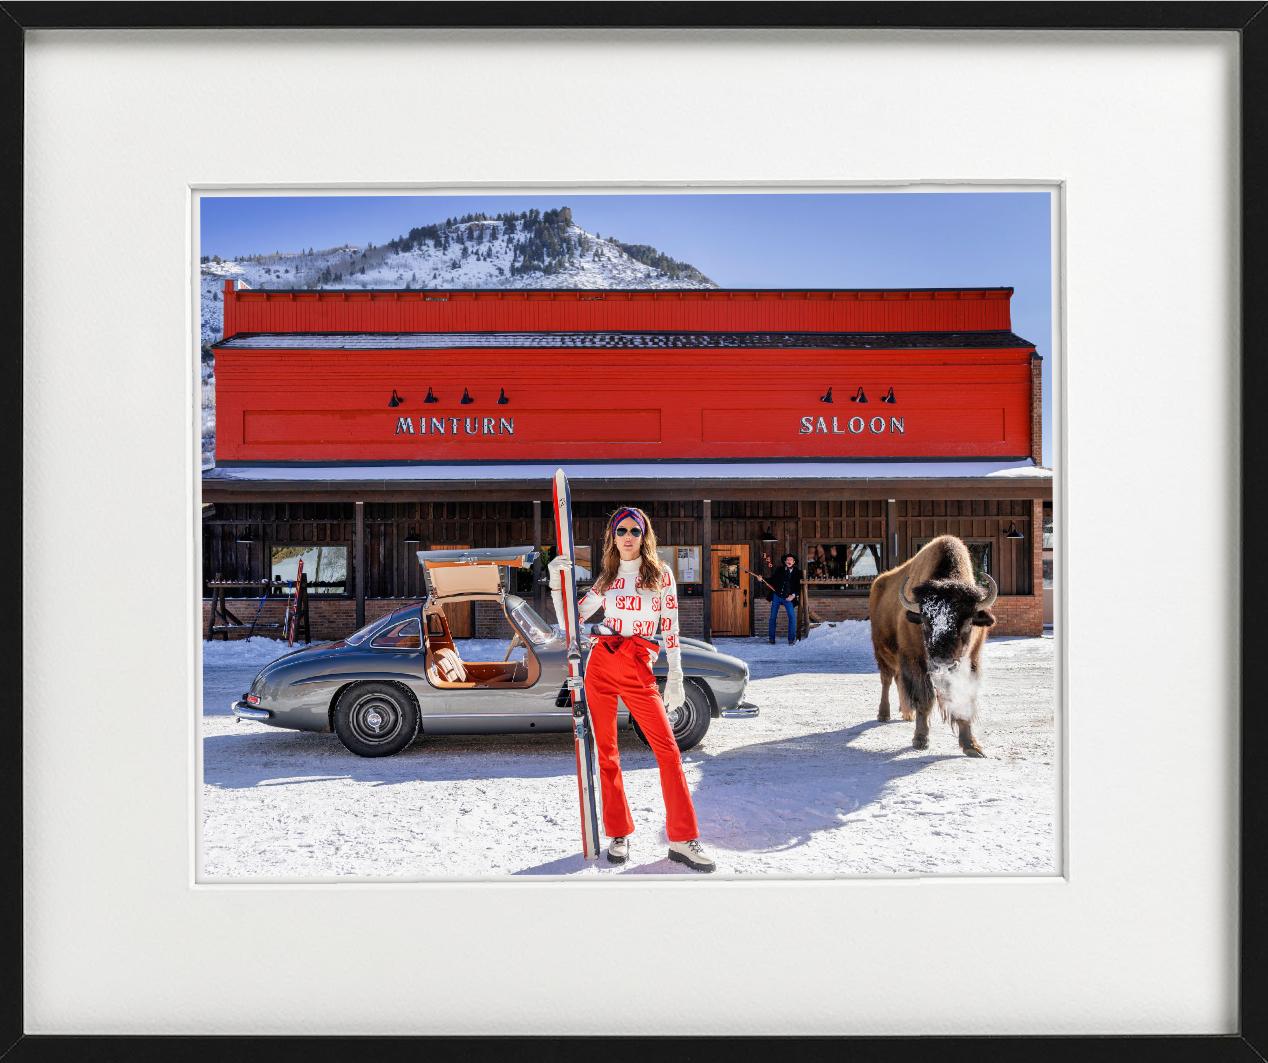 All prints are limited edition. Available in multiple sizes. High-end framing on request.

All prints are done and signed by the artist. The collector receives an additional certificate of authenticity from the gallery.

'Code Red' by David Yarrow